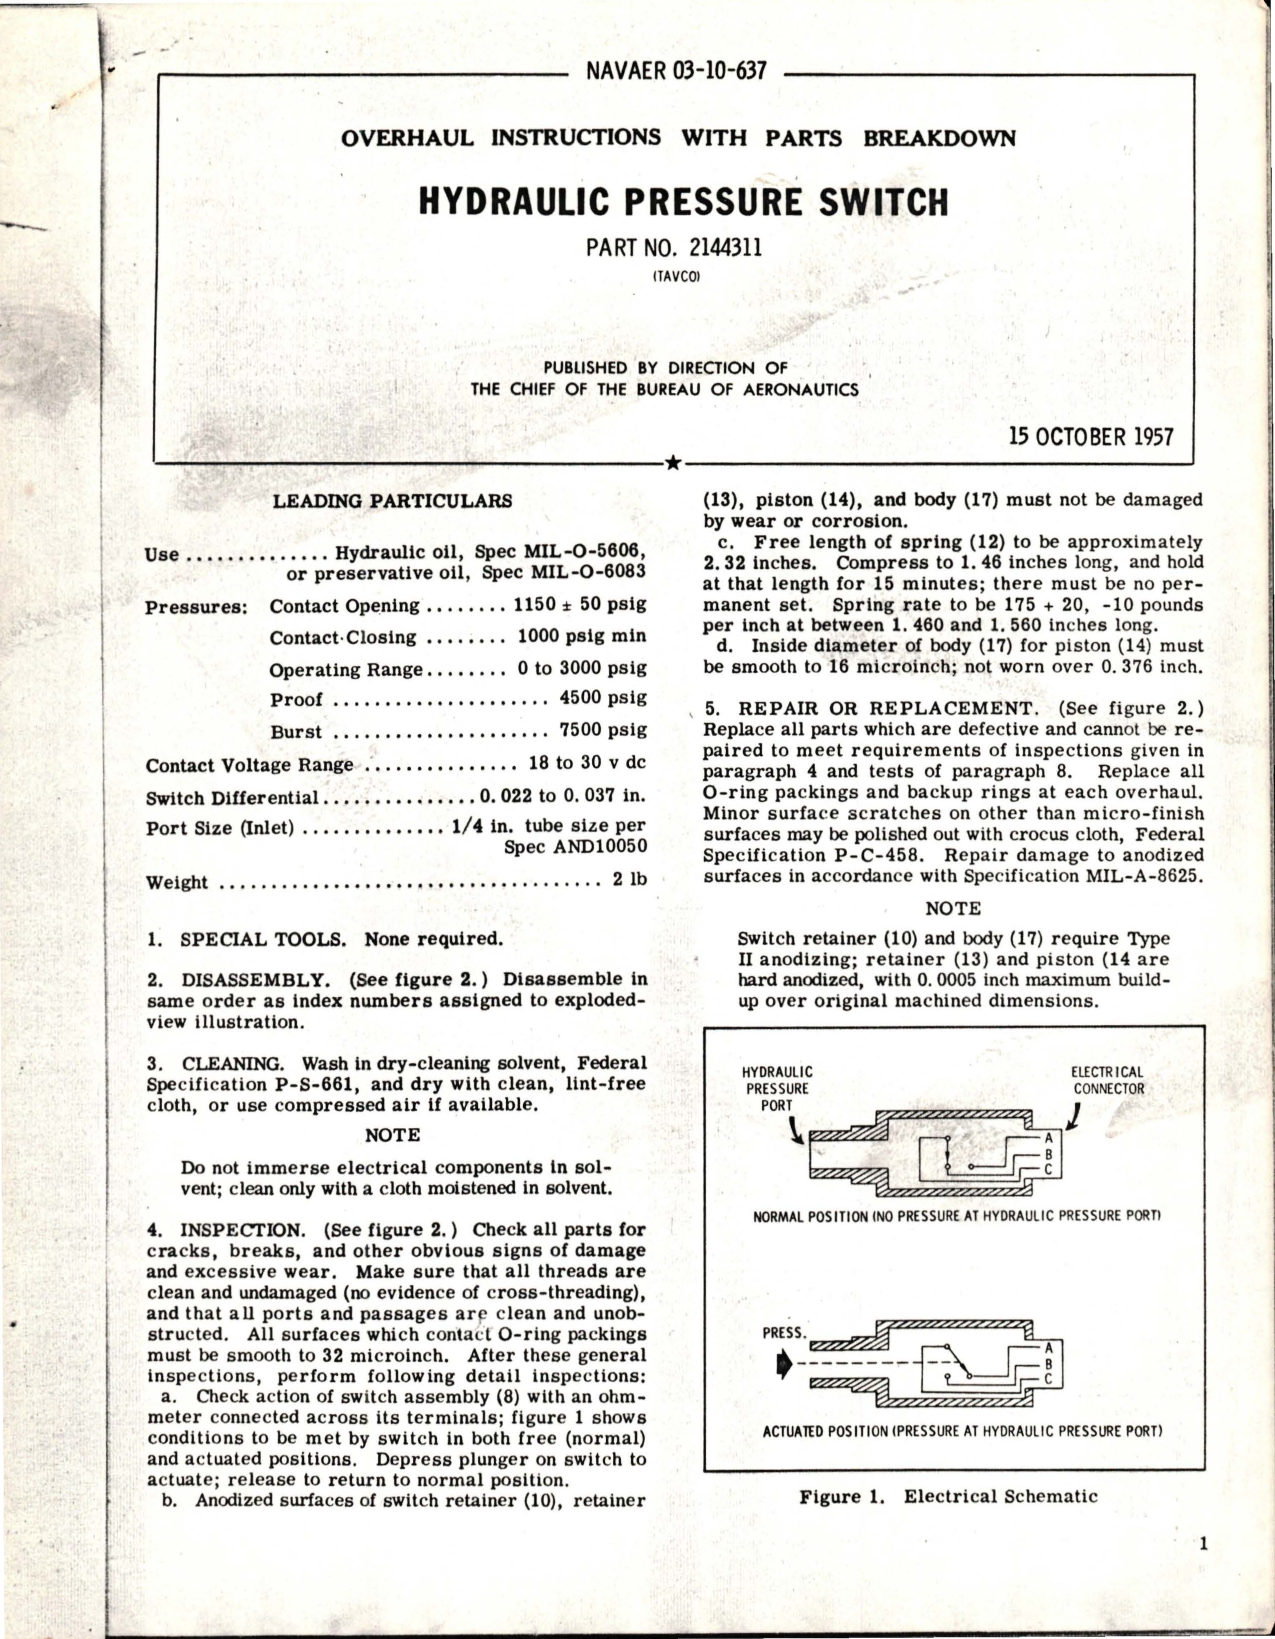 Sample page 1 from AirCorps Library document: Overhaul Instructions with Parts Breakdown for Hydraulic Pressure Switch - Part 2144311